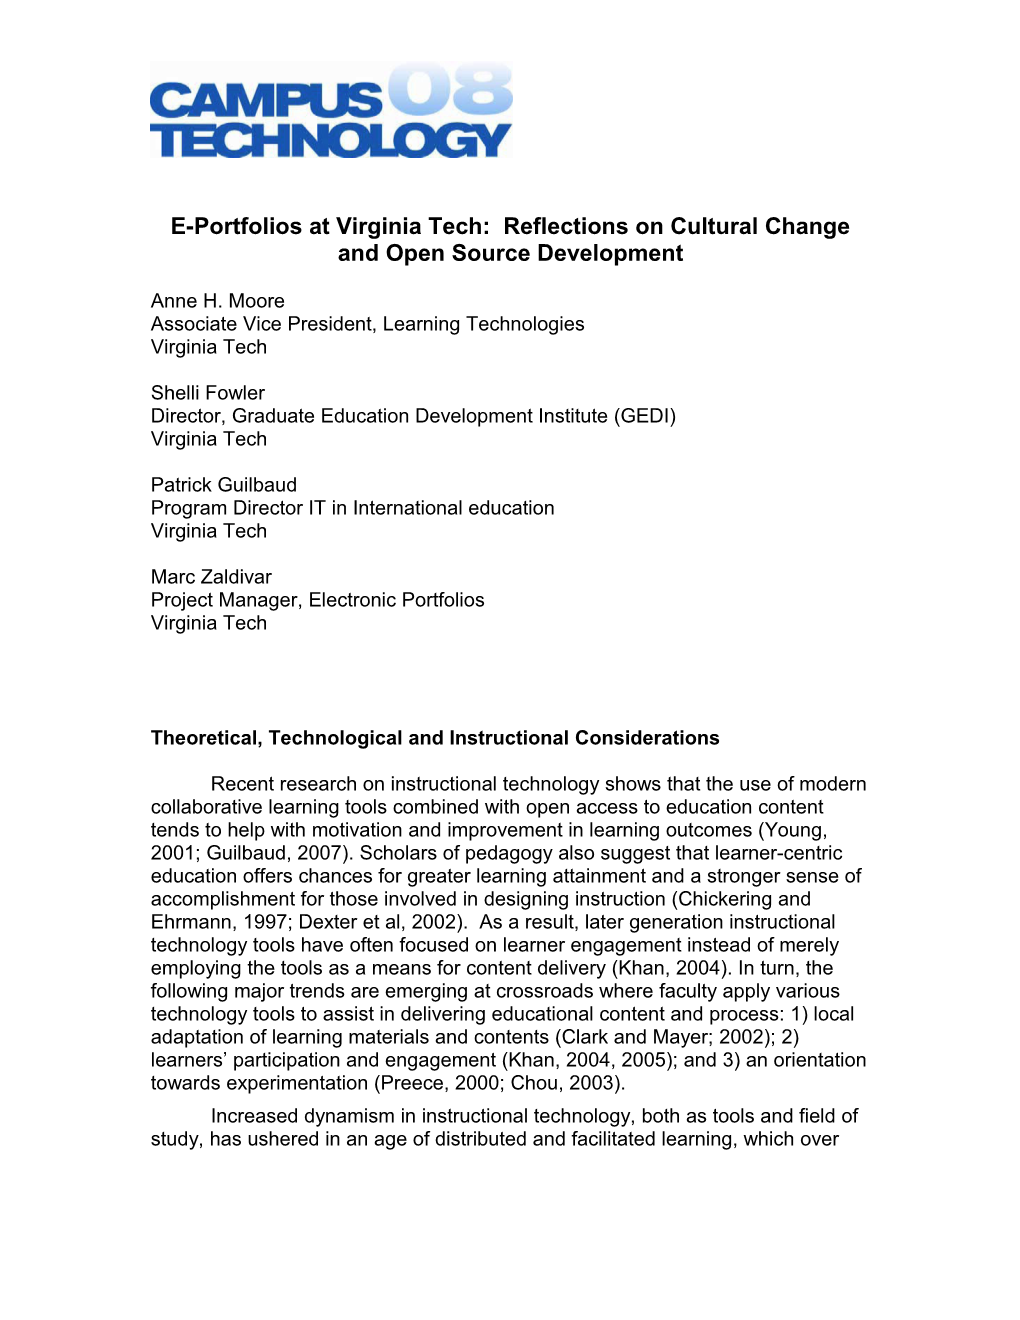 E-Portfolios at Virginia Tech: Reflections on Cultural Change and Open Source Development